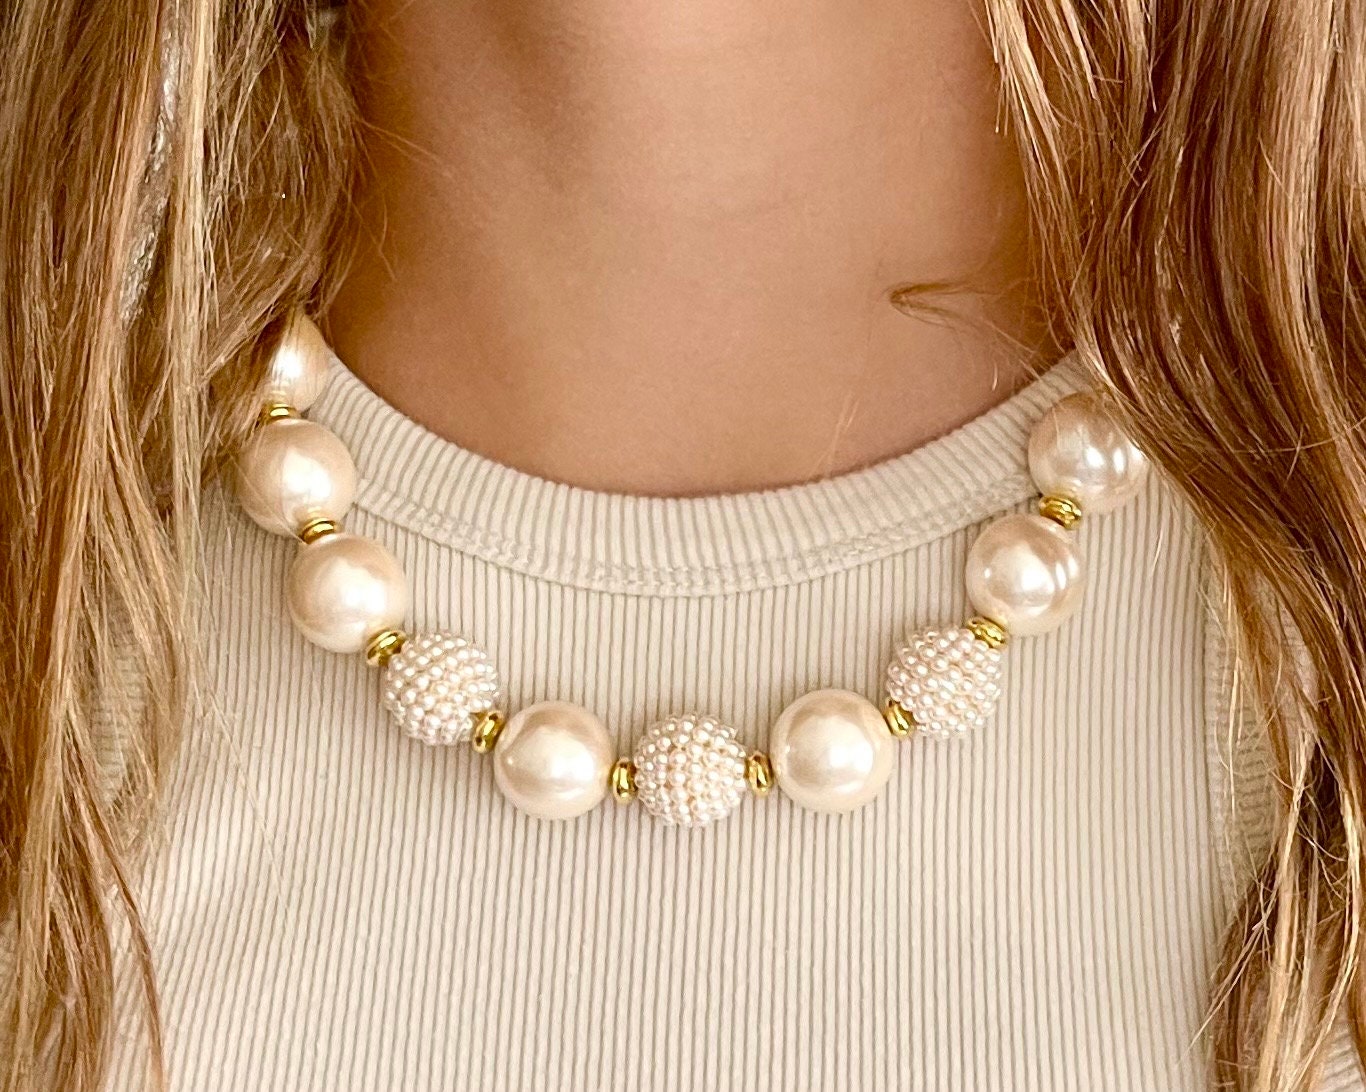 Vintage Richelieu Faux Pearl Long Necklace. Brand New With Original Tags.  Vintage Beaded Richelieu Long Necklace. Oversized Pearl Necklace - Etsy